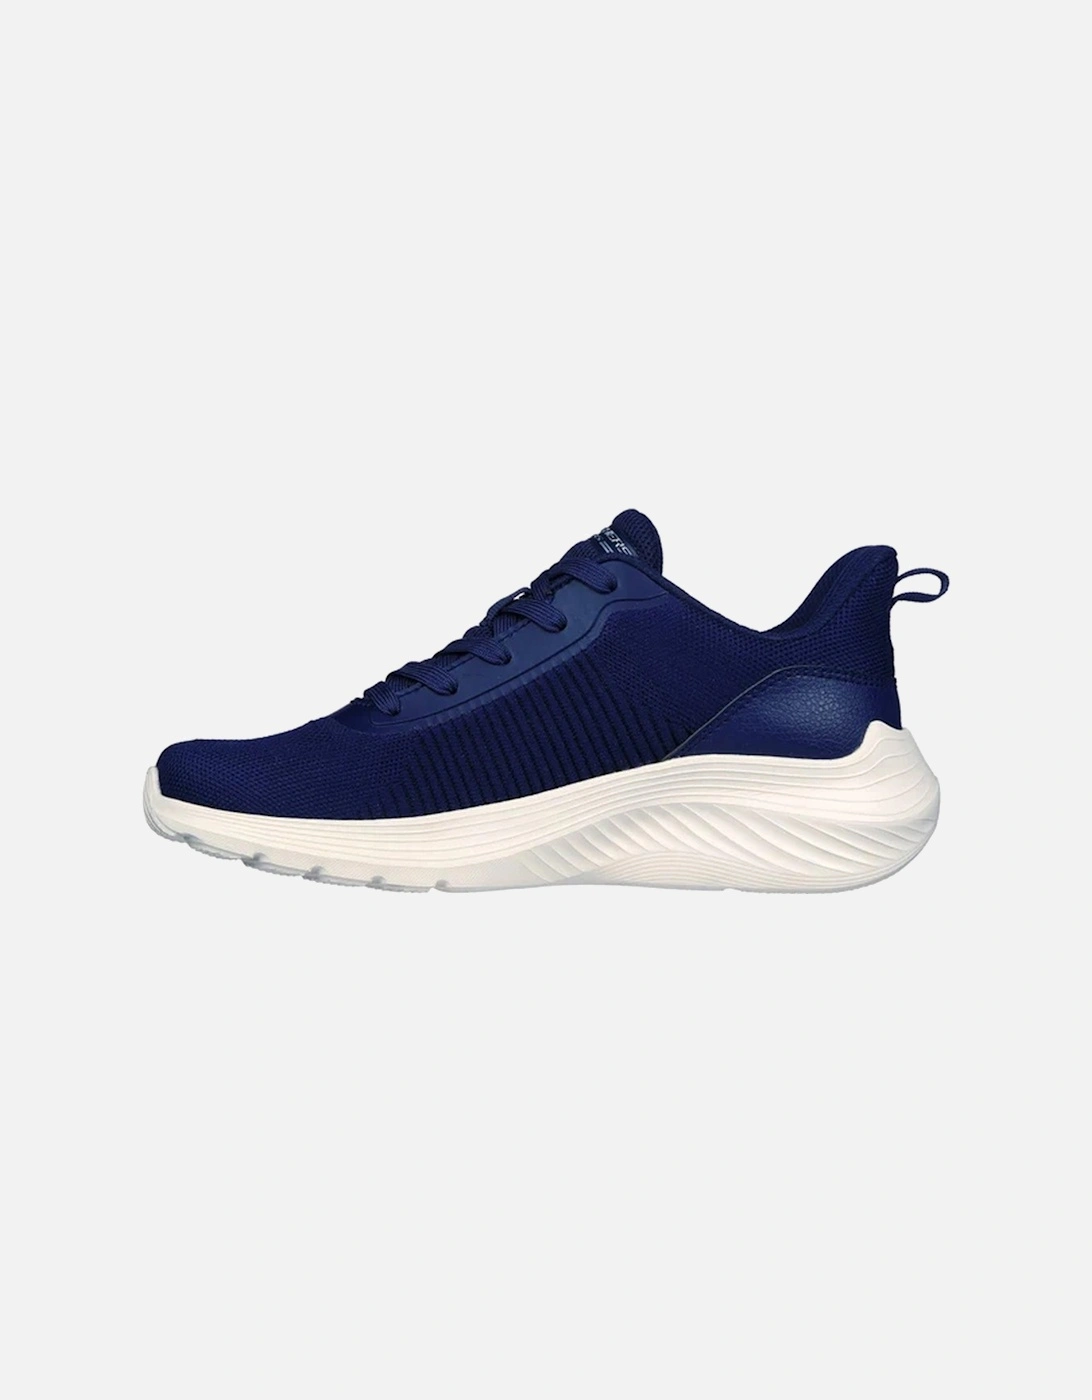 Womens/Ladies Bobs Squad Waves Trainers